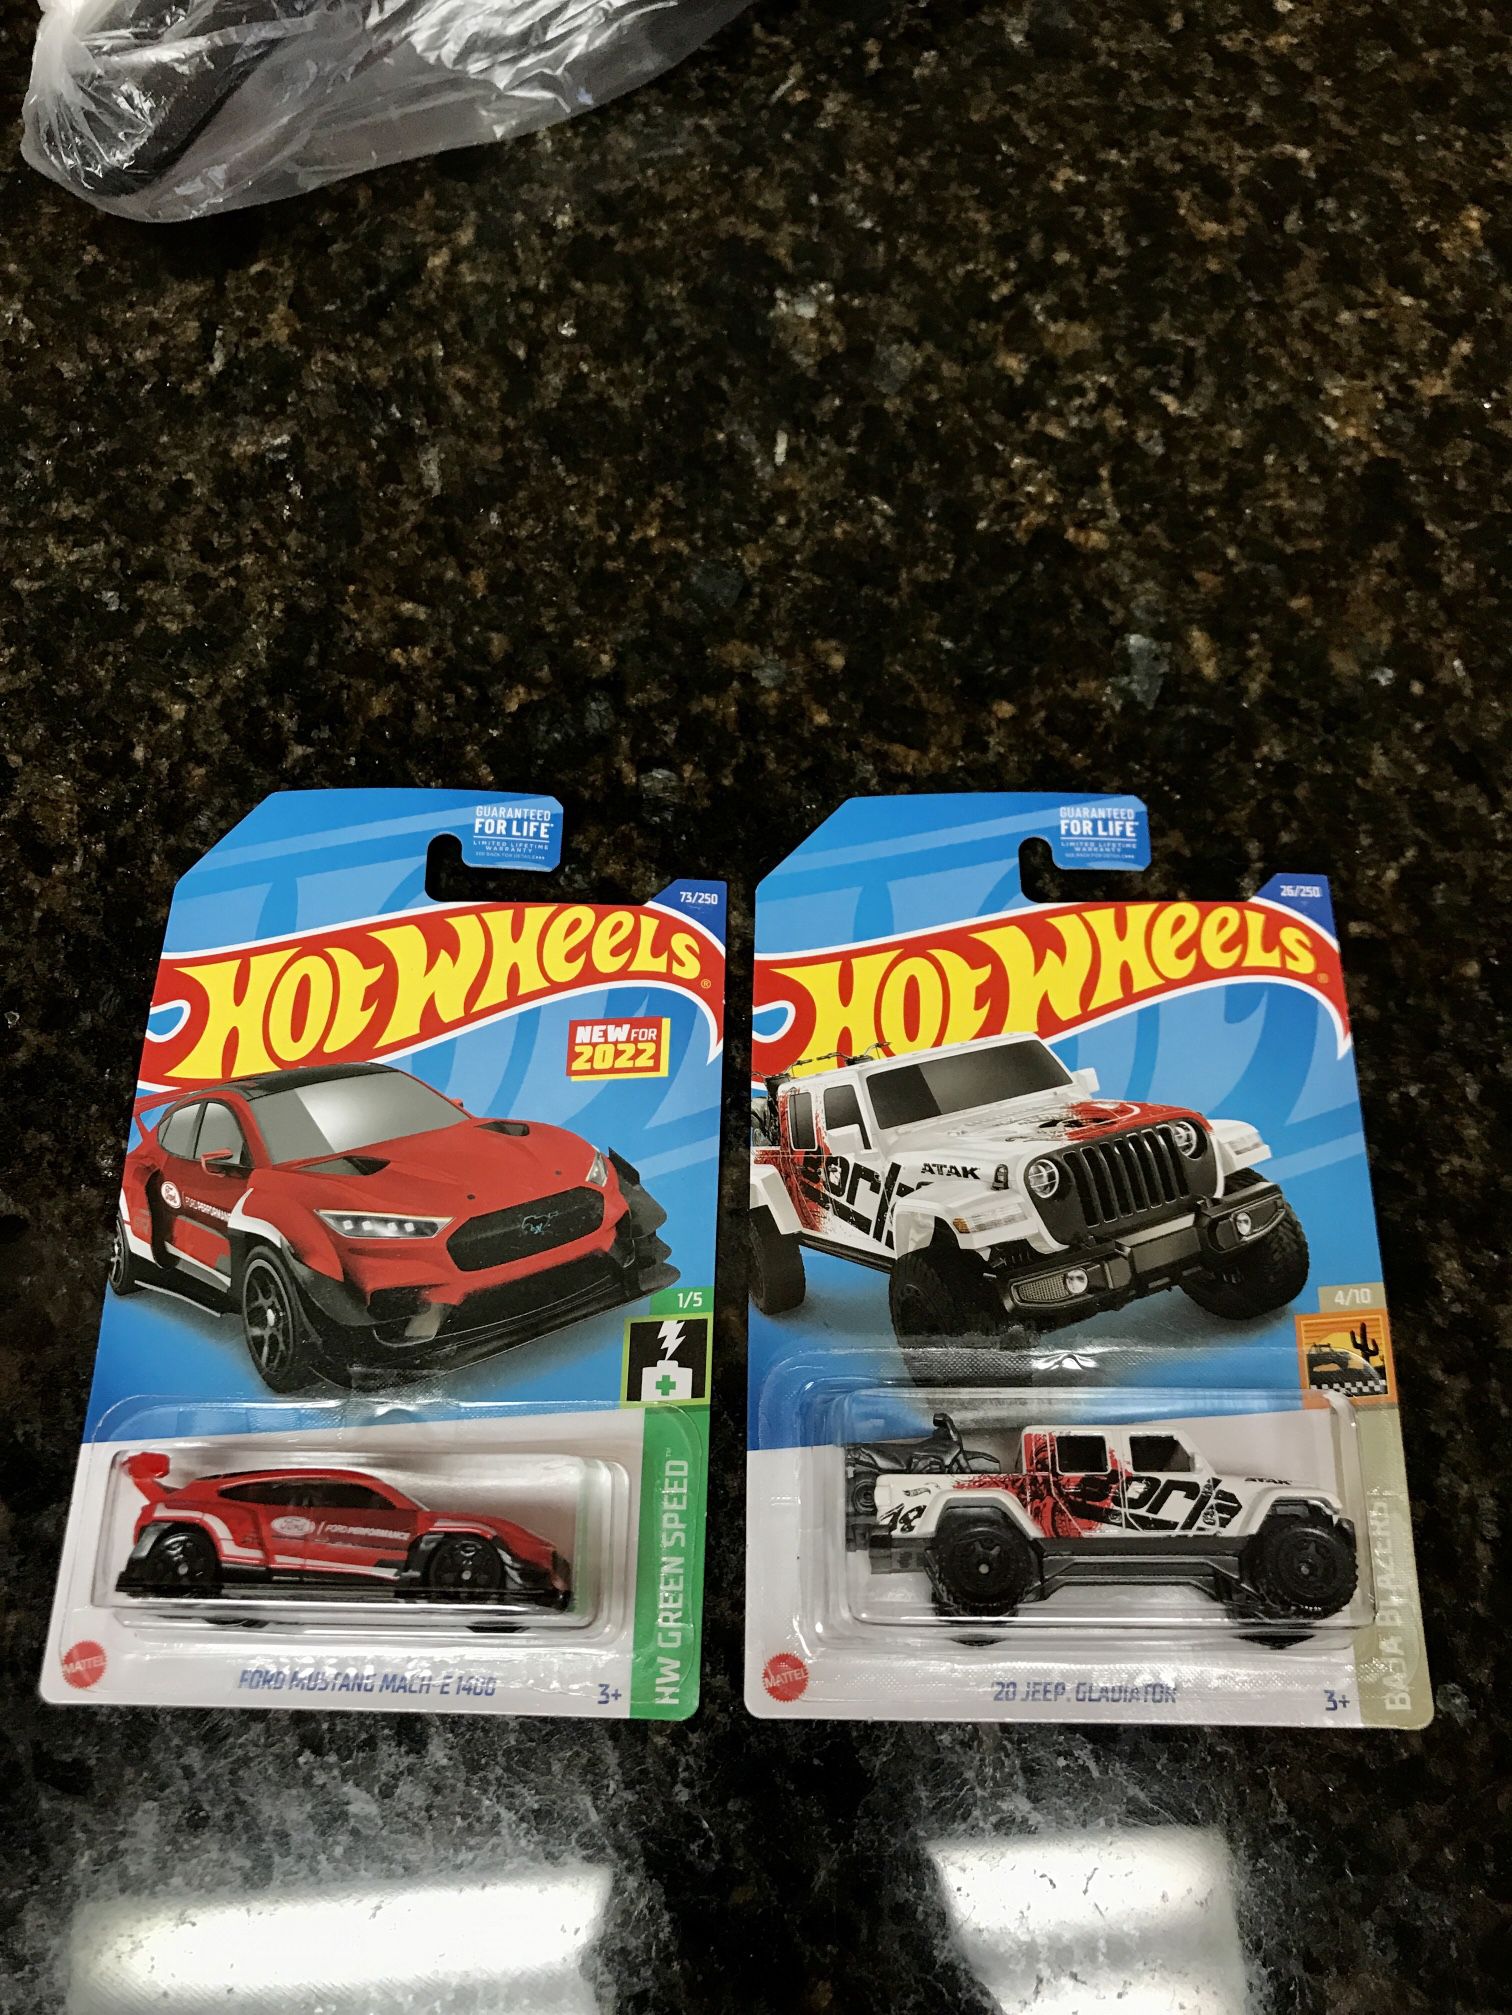 2x Hot wheels Diecast Racing Cars Toy Truck SUV Sport Ford Mustang Mach-E 1400 And ‘20 Jeep Gladiator 